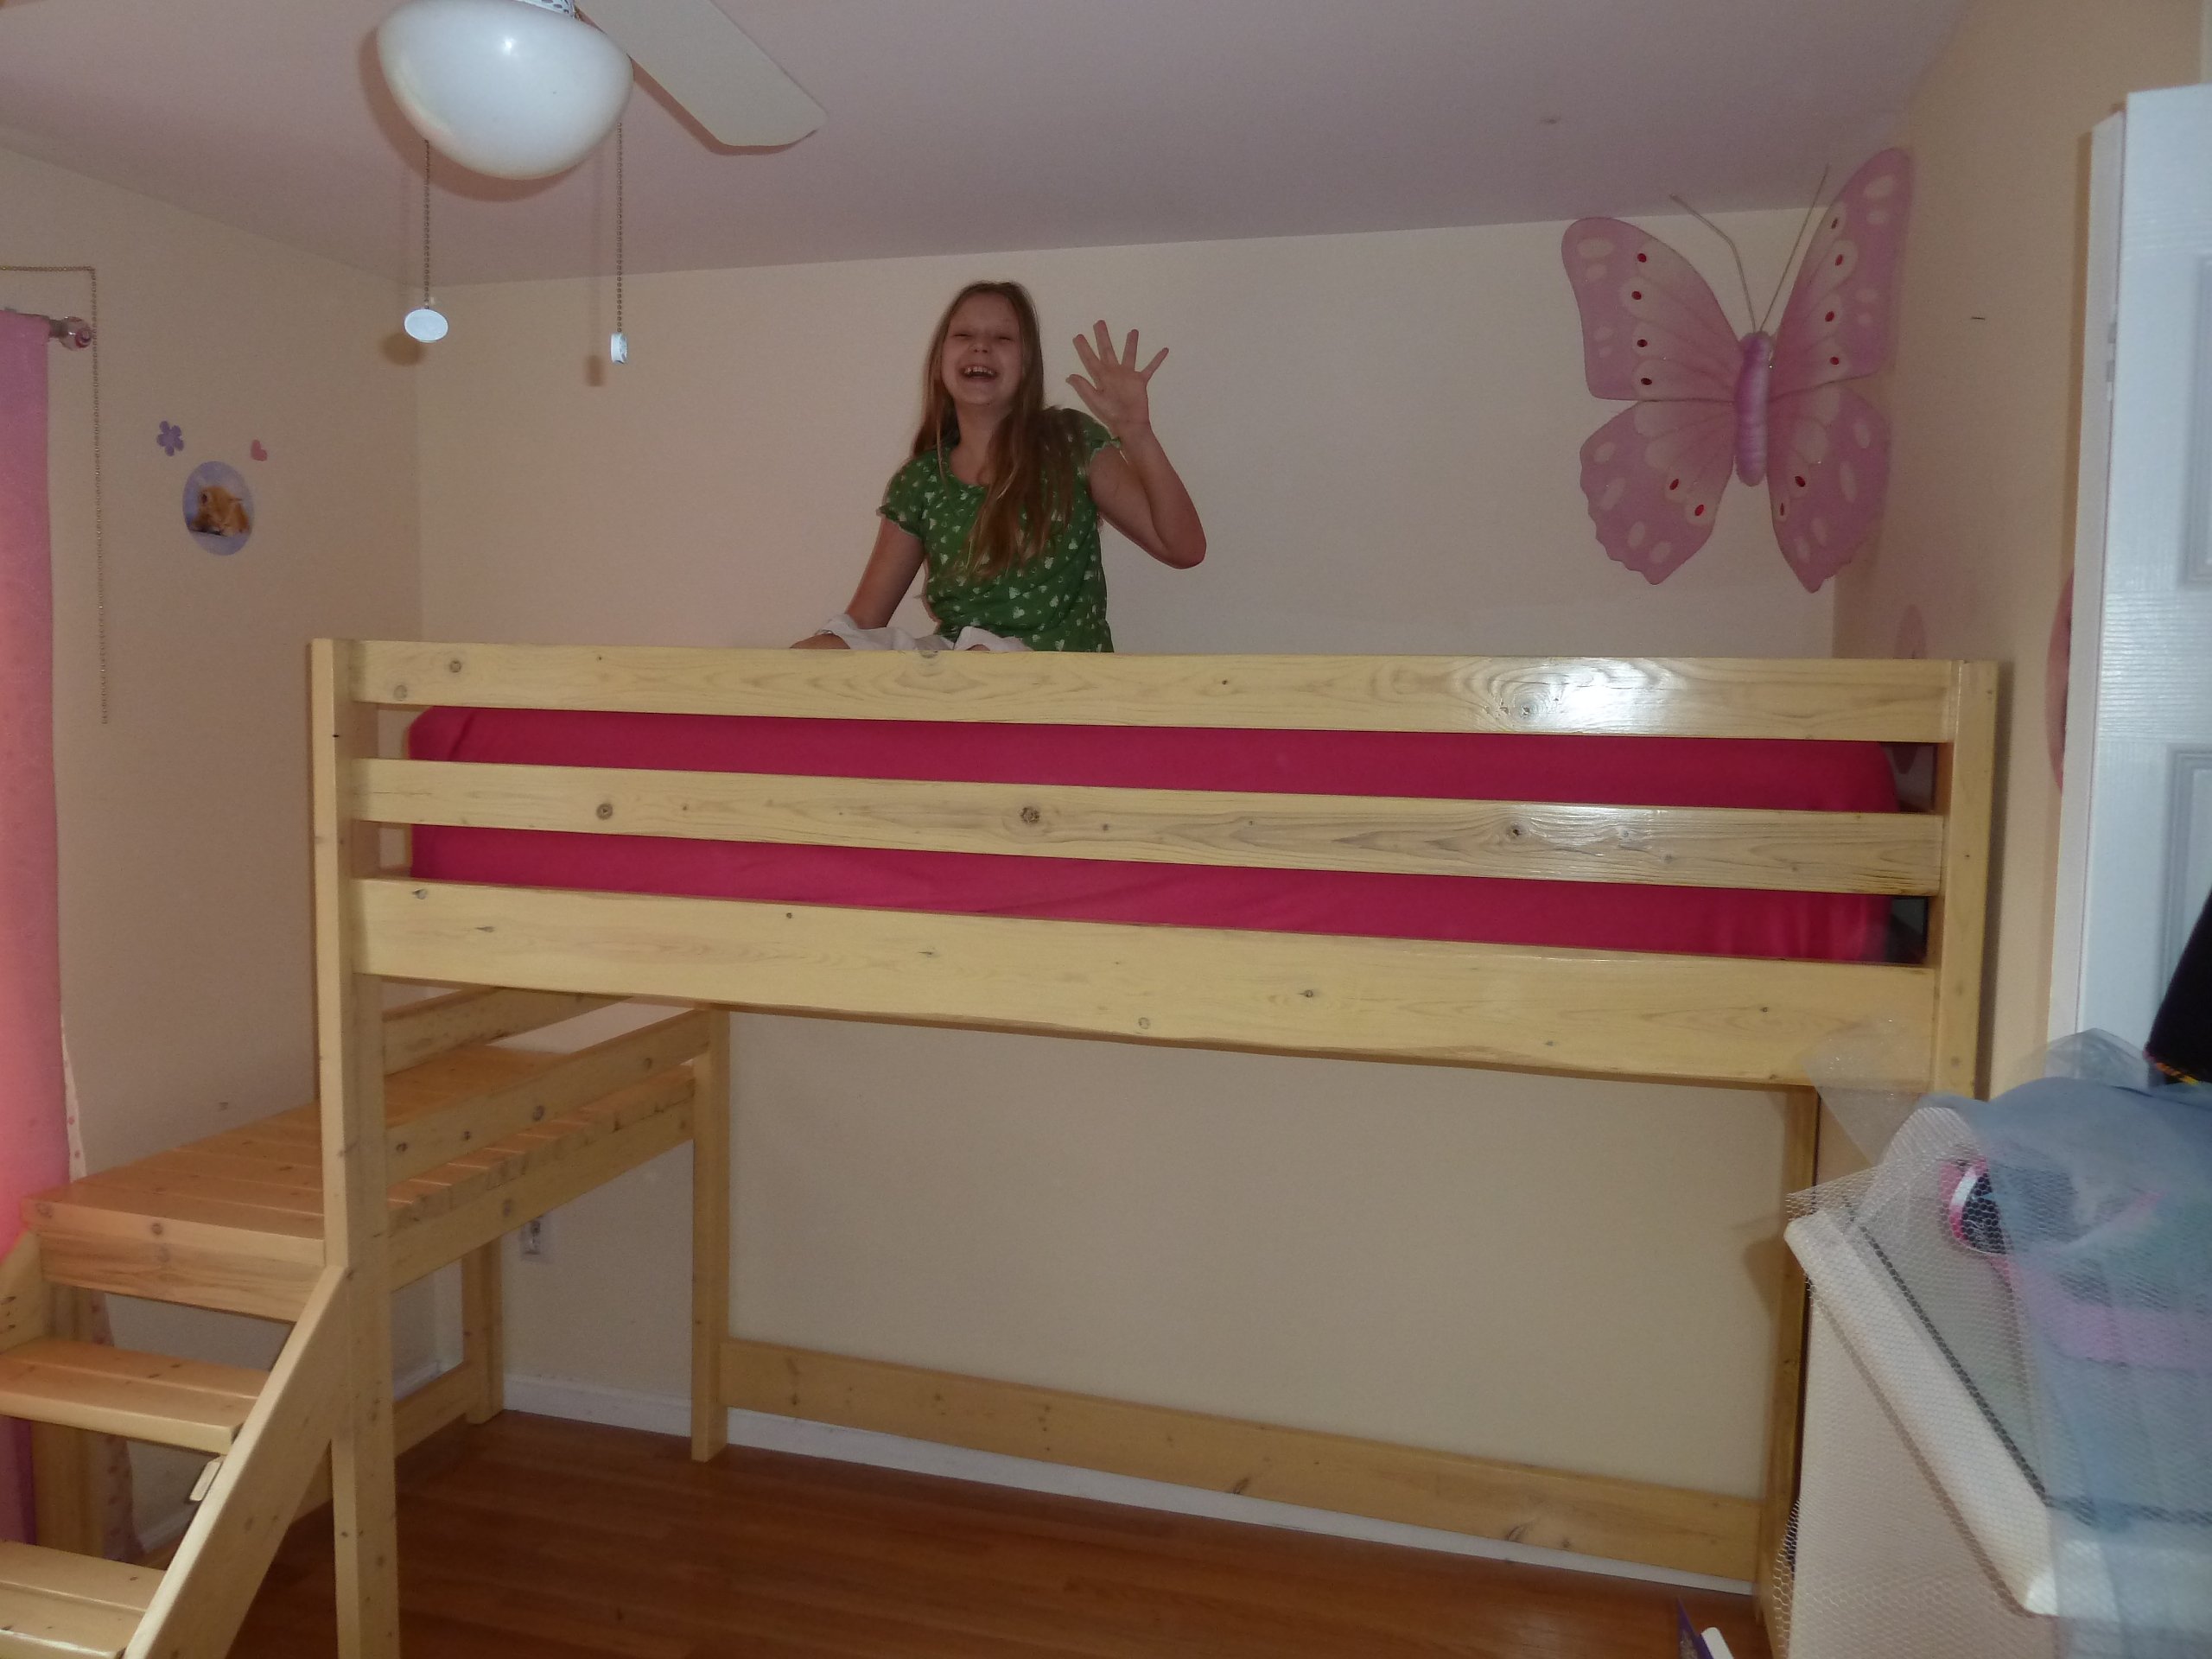 twin xl bunk bed frame